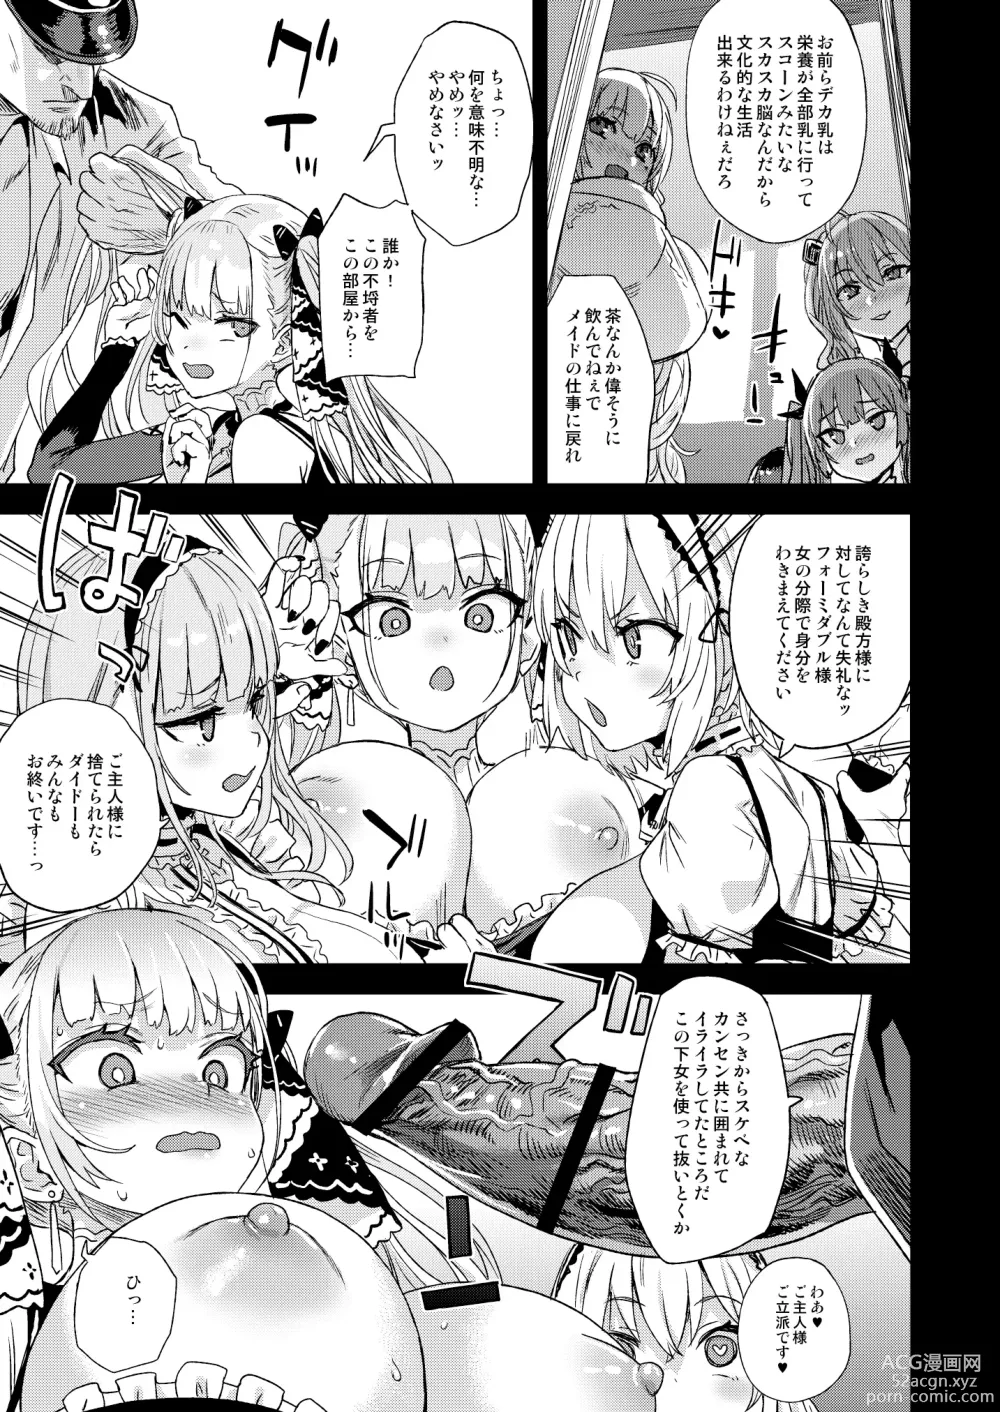 Page 5 of doujinshi Lady falls into a maid